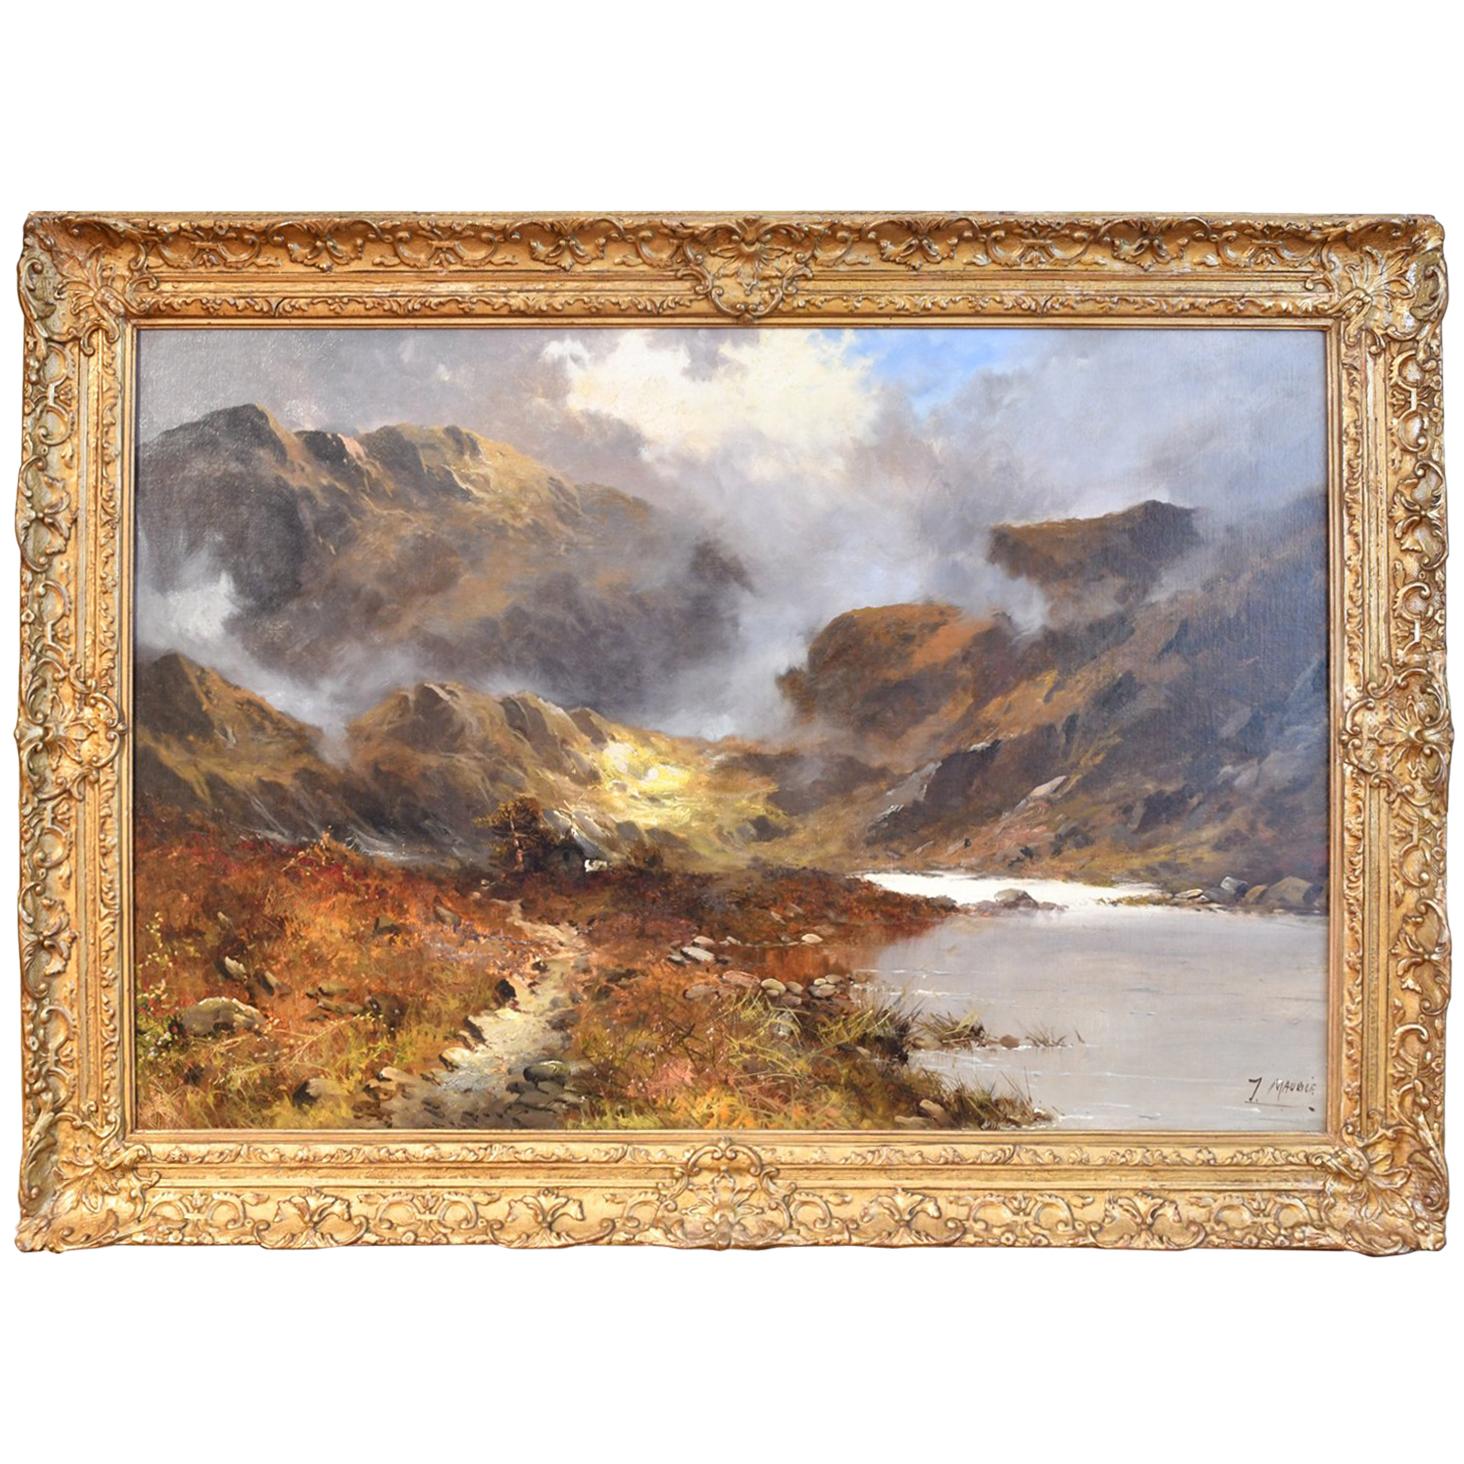 Signed J. Maurice Oil Painting of Welsh Highlands with Original Frame circa 1890